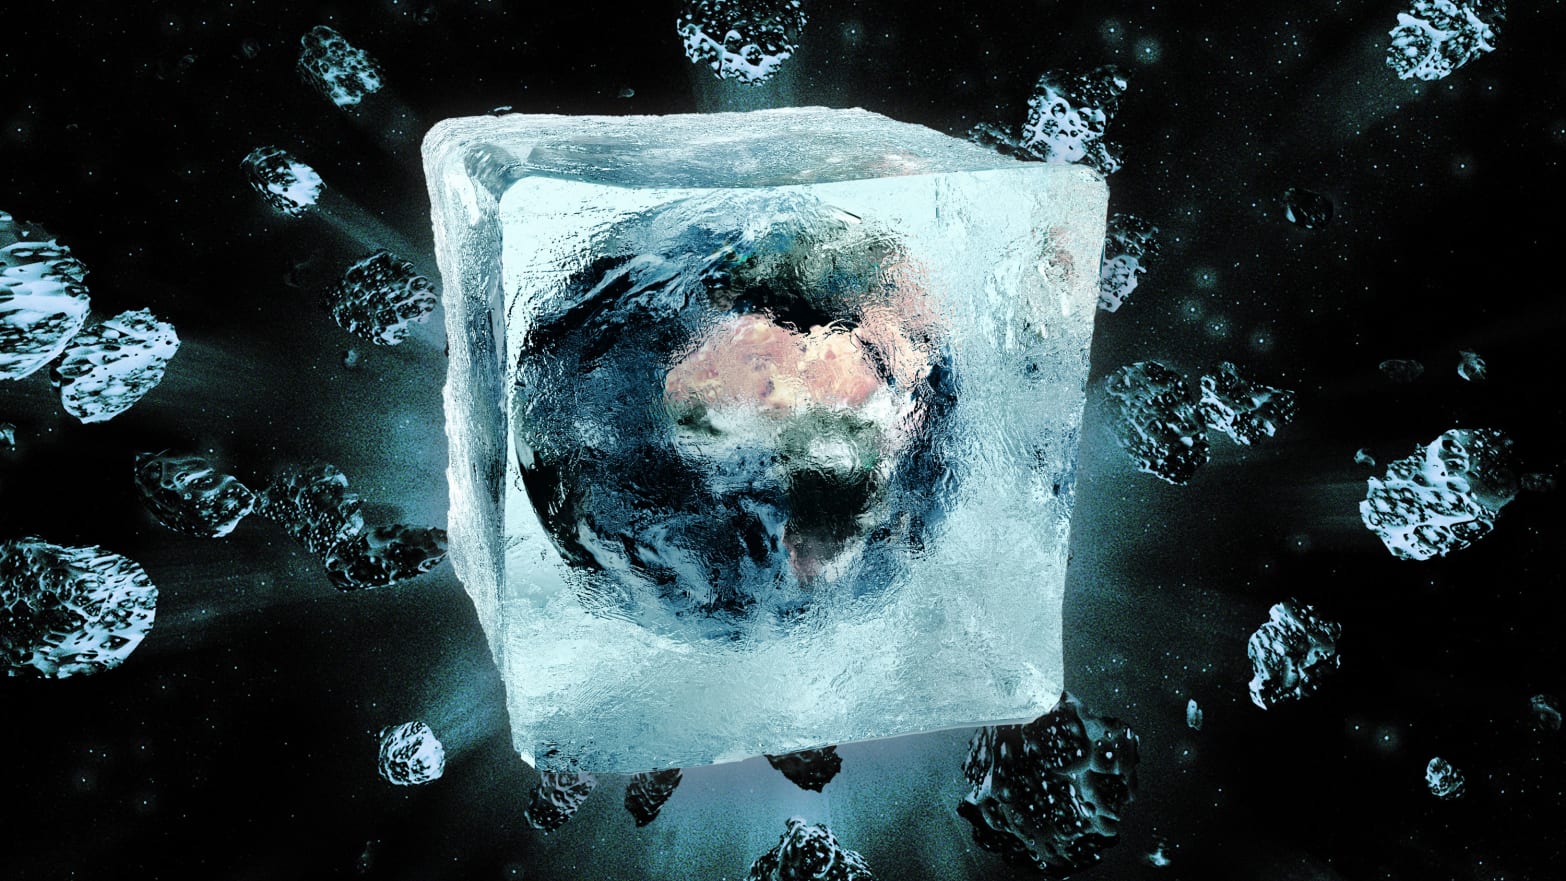 An illustration including a photo of the Earth in an Ice Cube surrounded by Asteroids